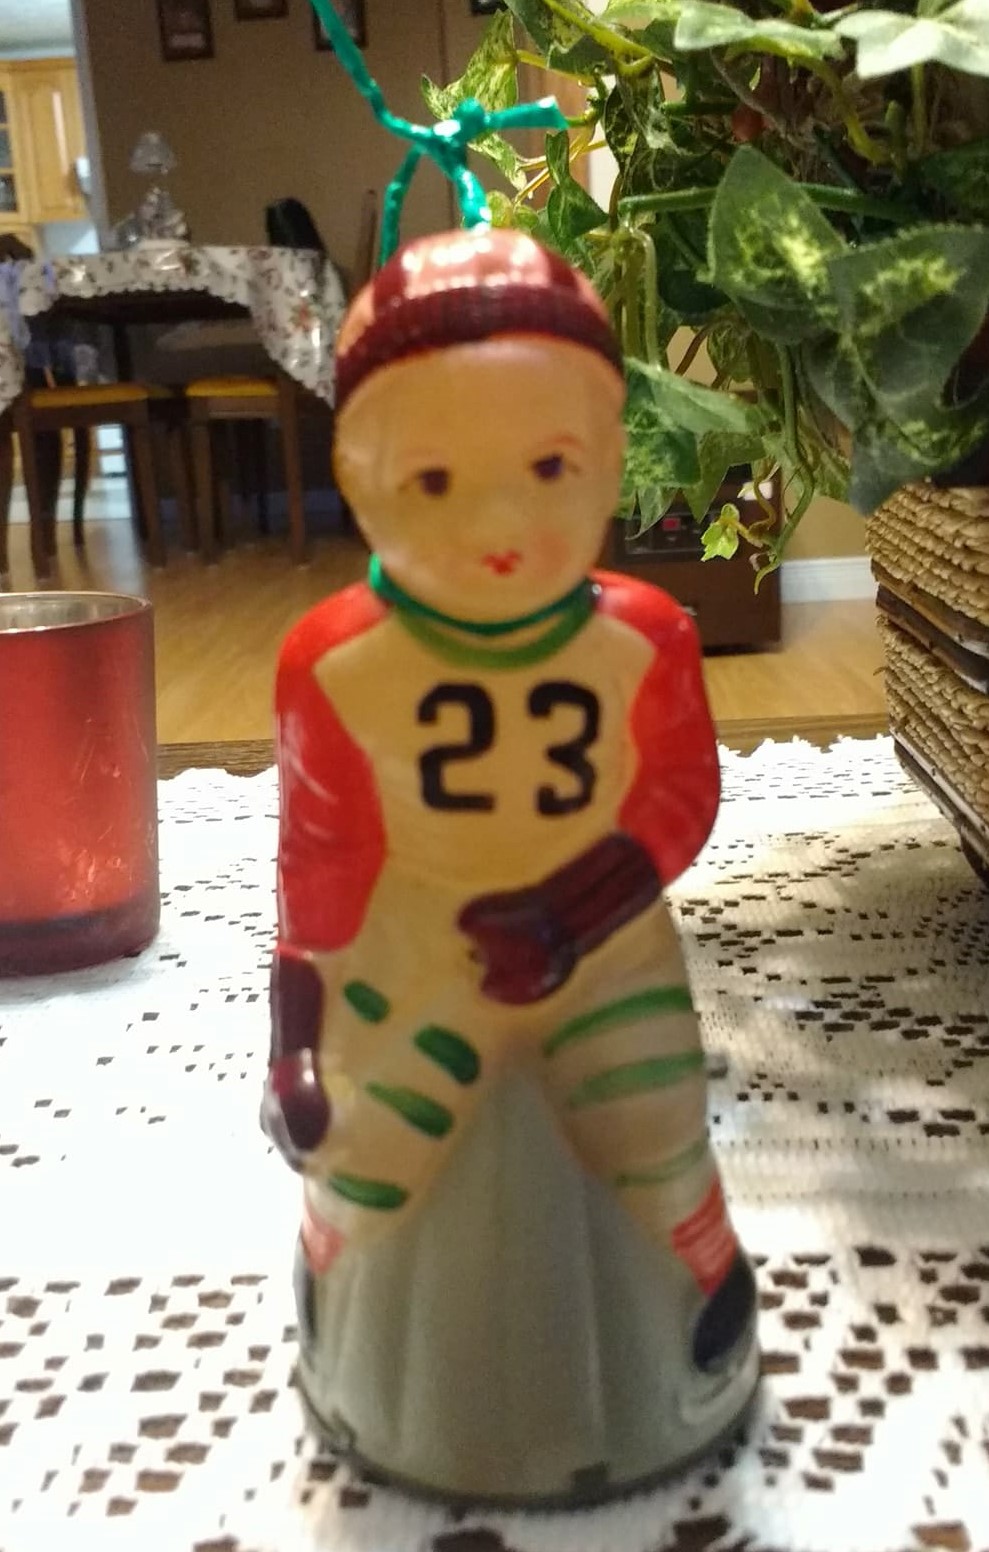 A wind up toy Hockey player that is more than 70 years old